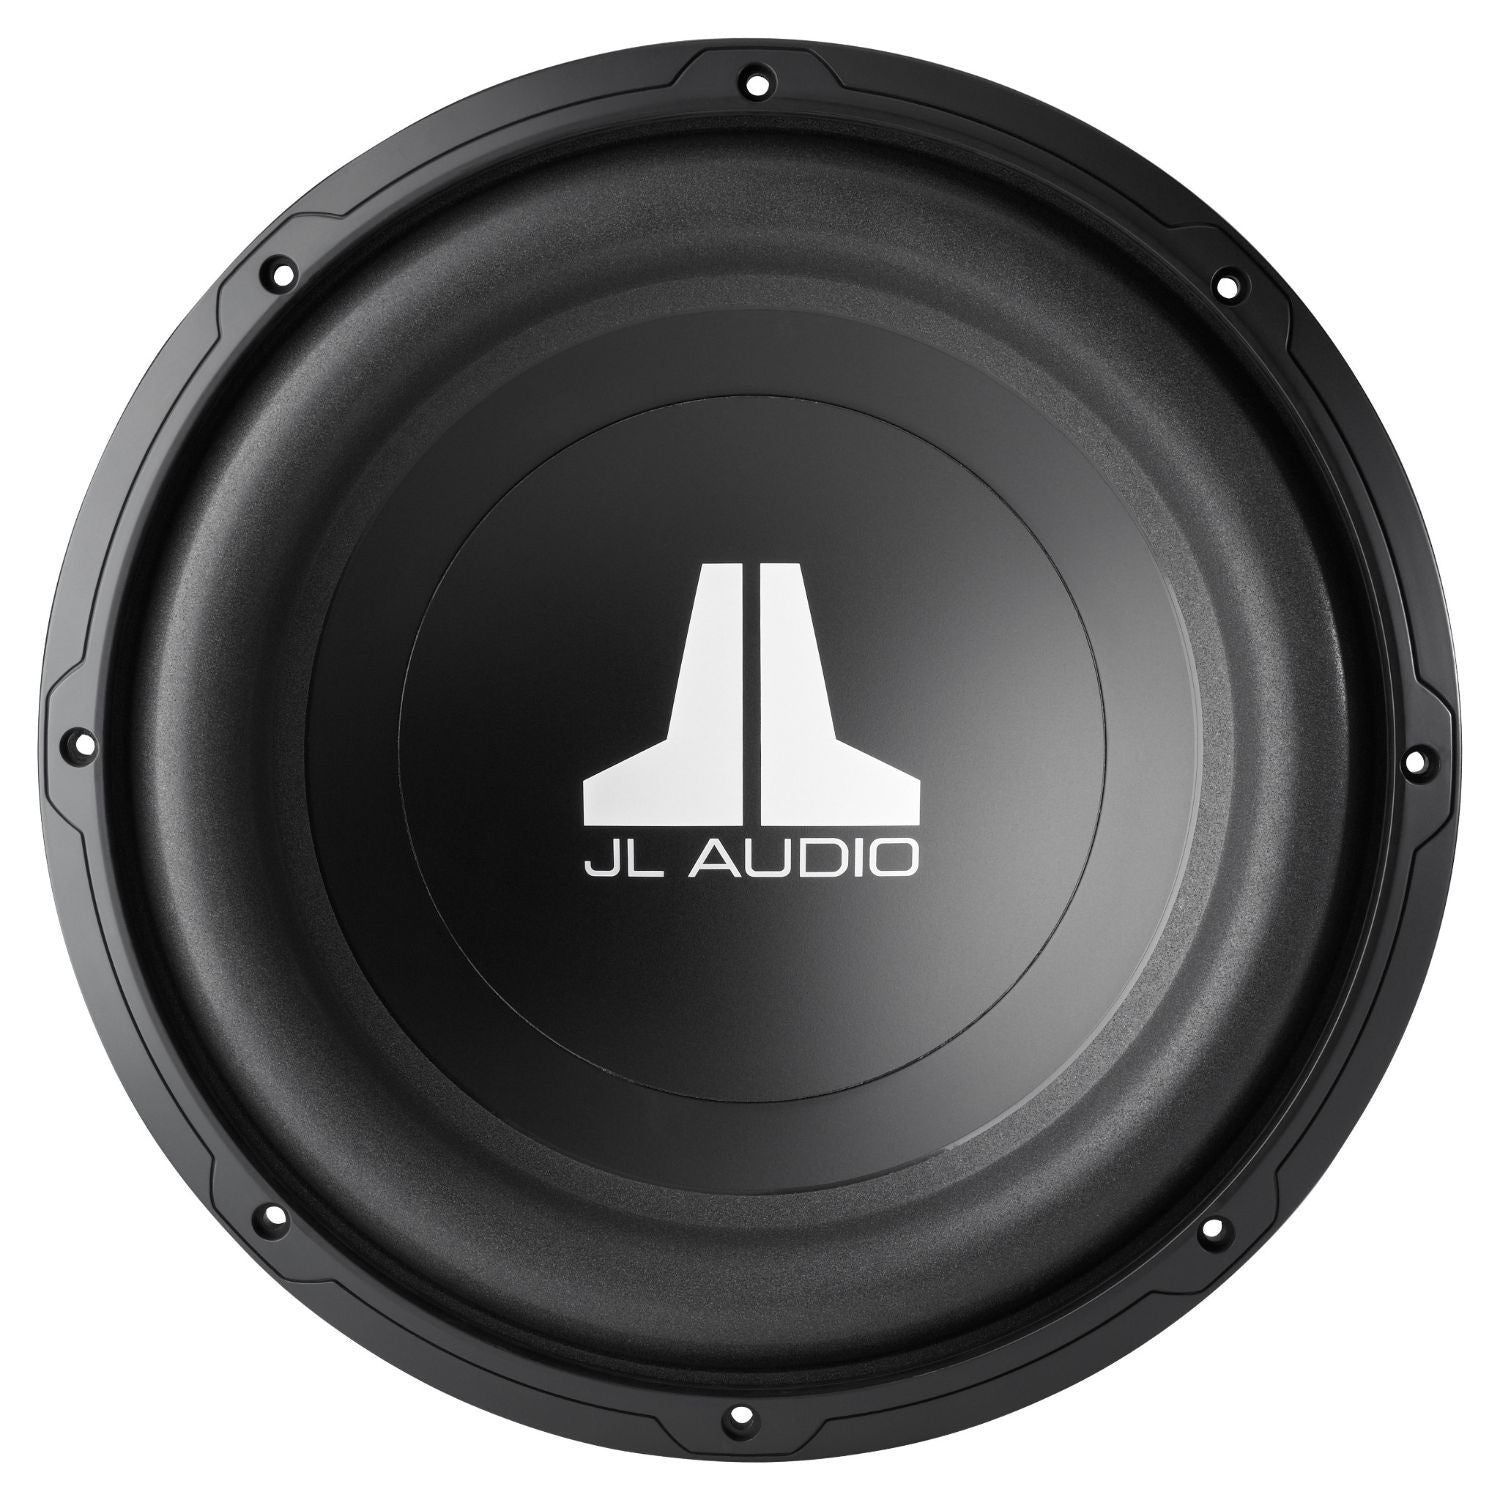 4 12 inch subwoofers